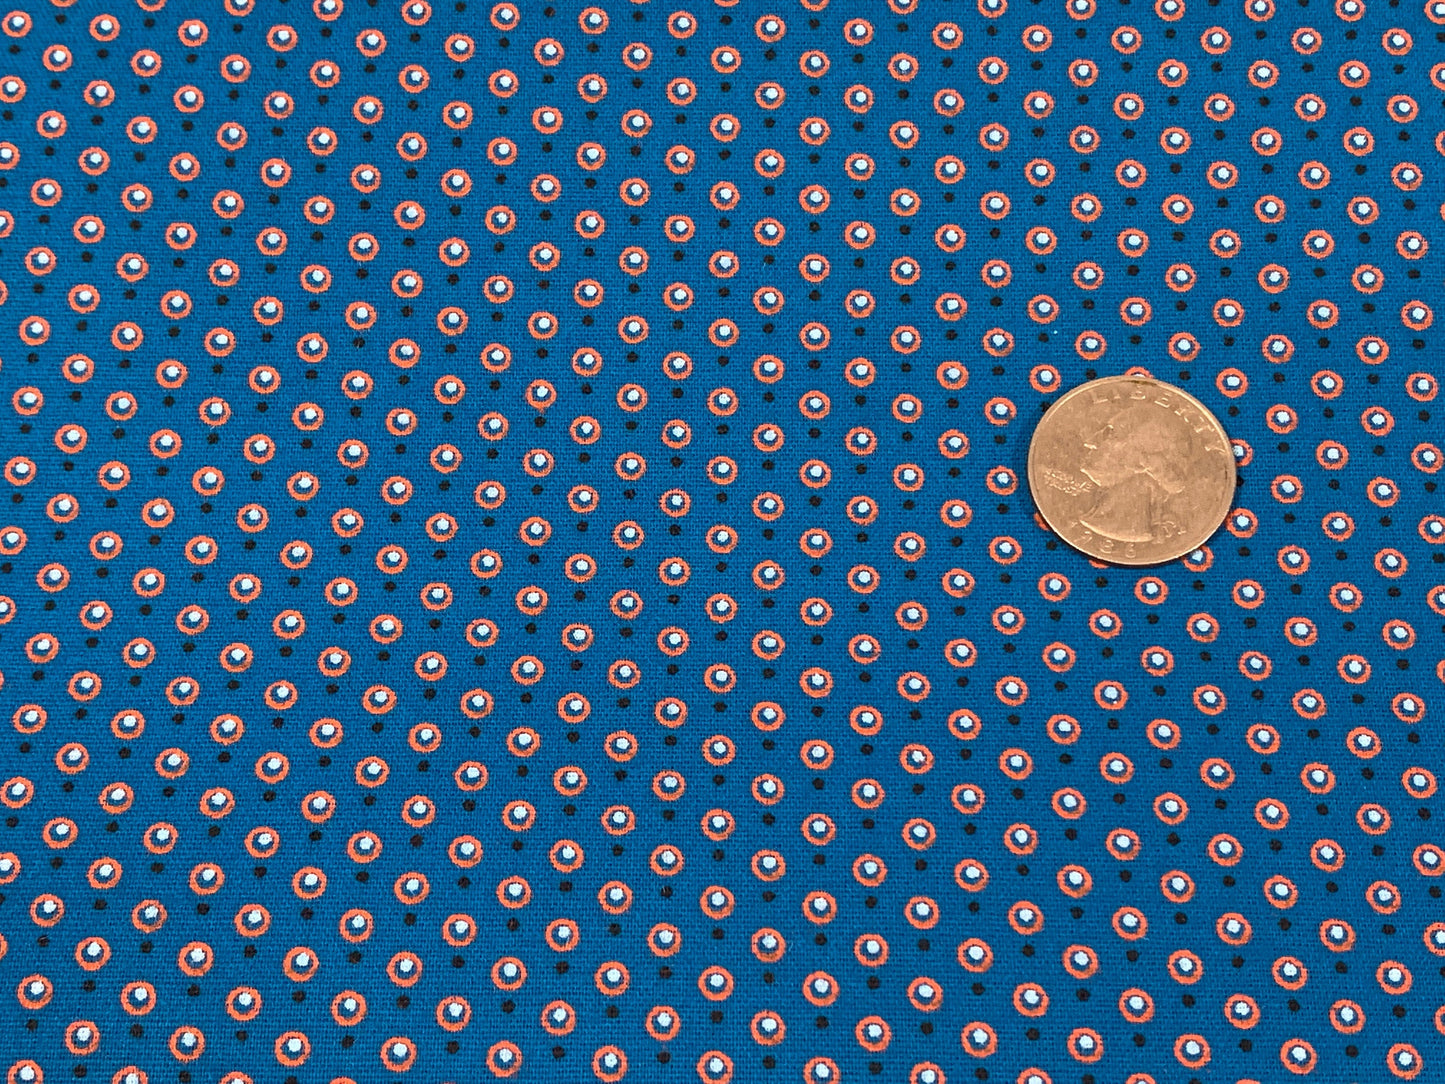 South African Shweshwe Fabric by the YARD. Da Gama Three Cats Turquoise & Orange Circled Dots. 100% Cotton Print for Quilts, Apparel, Décor.